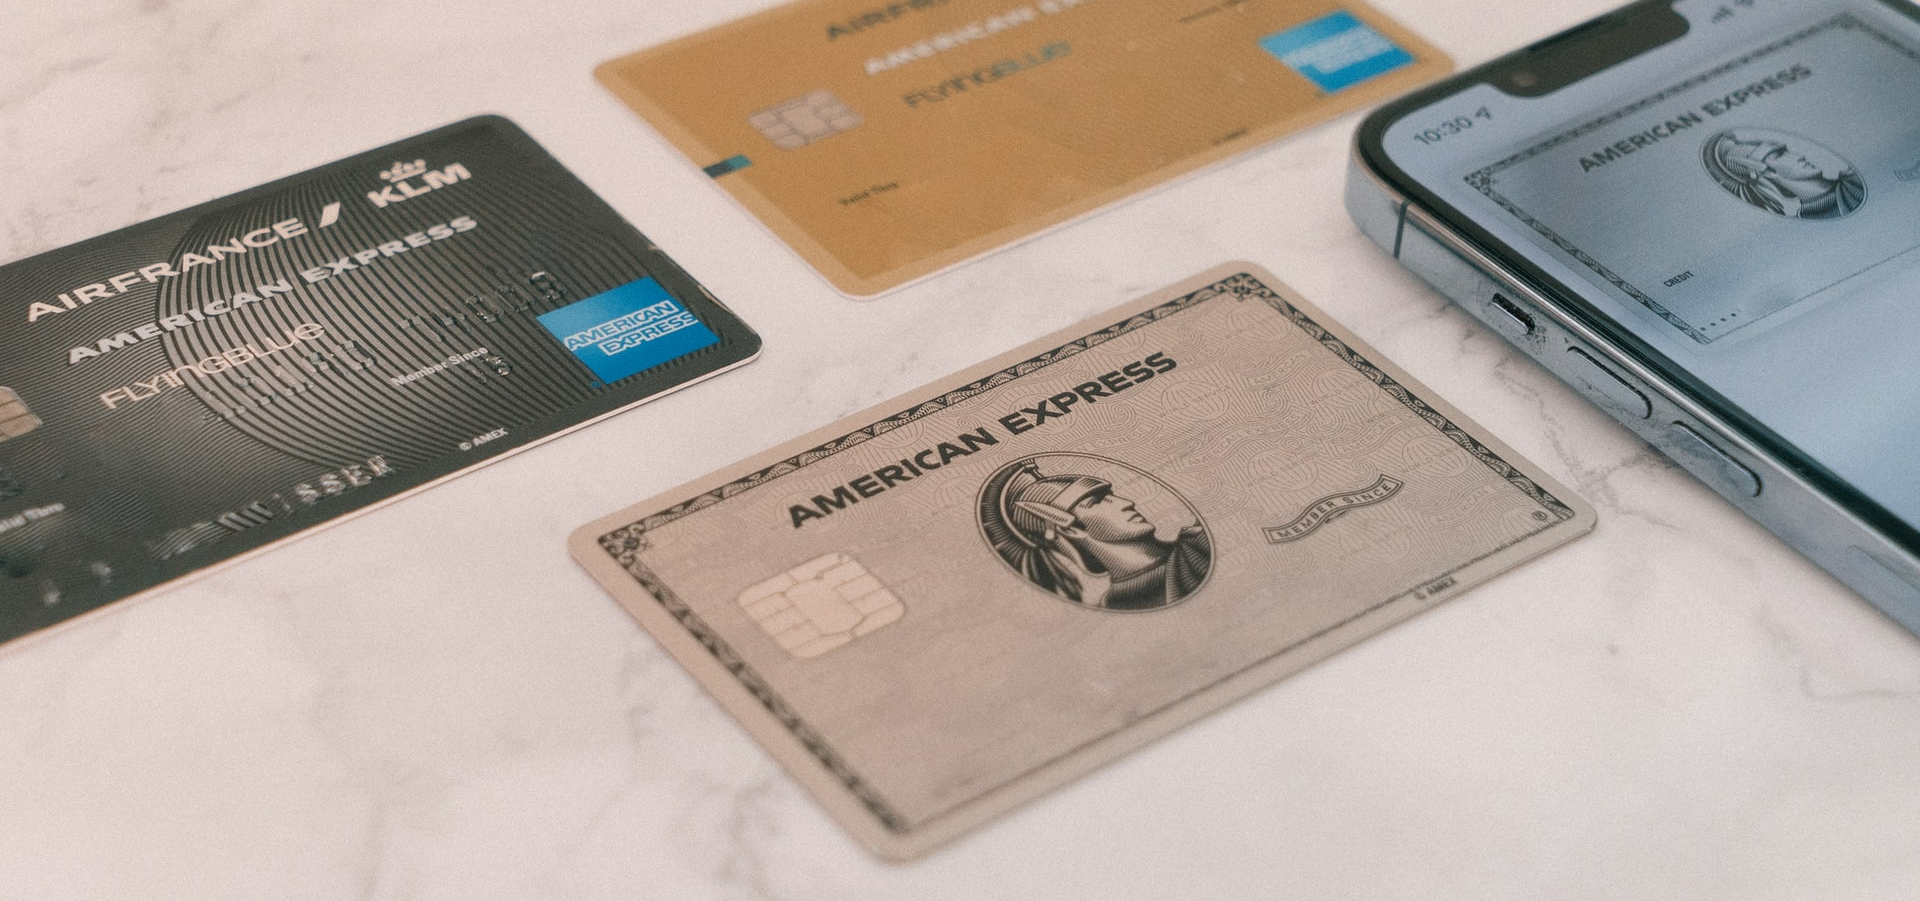 American Express in 2021 gave rewards members up to $50 in credits (up to five credits of $10 each) for shopping with small businesses.